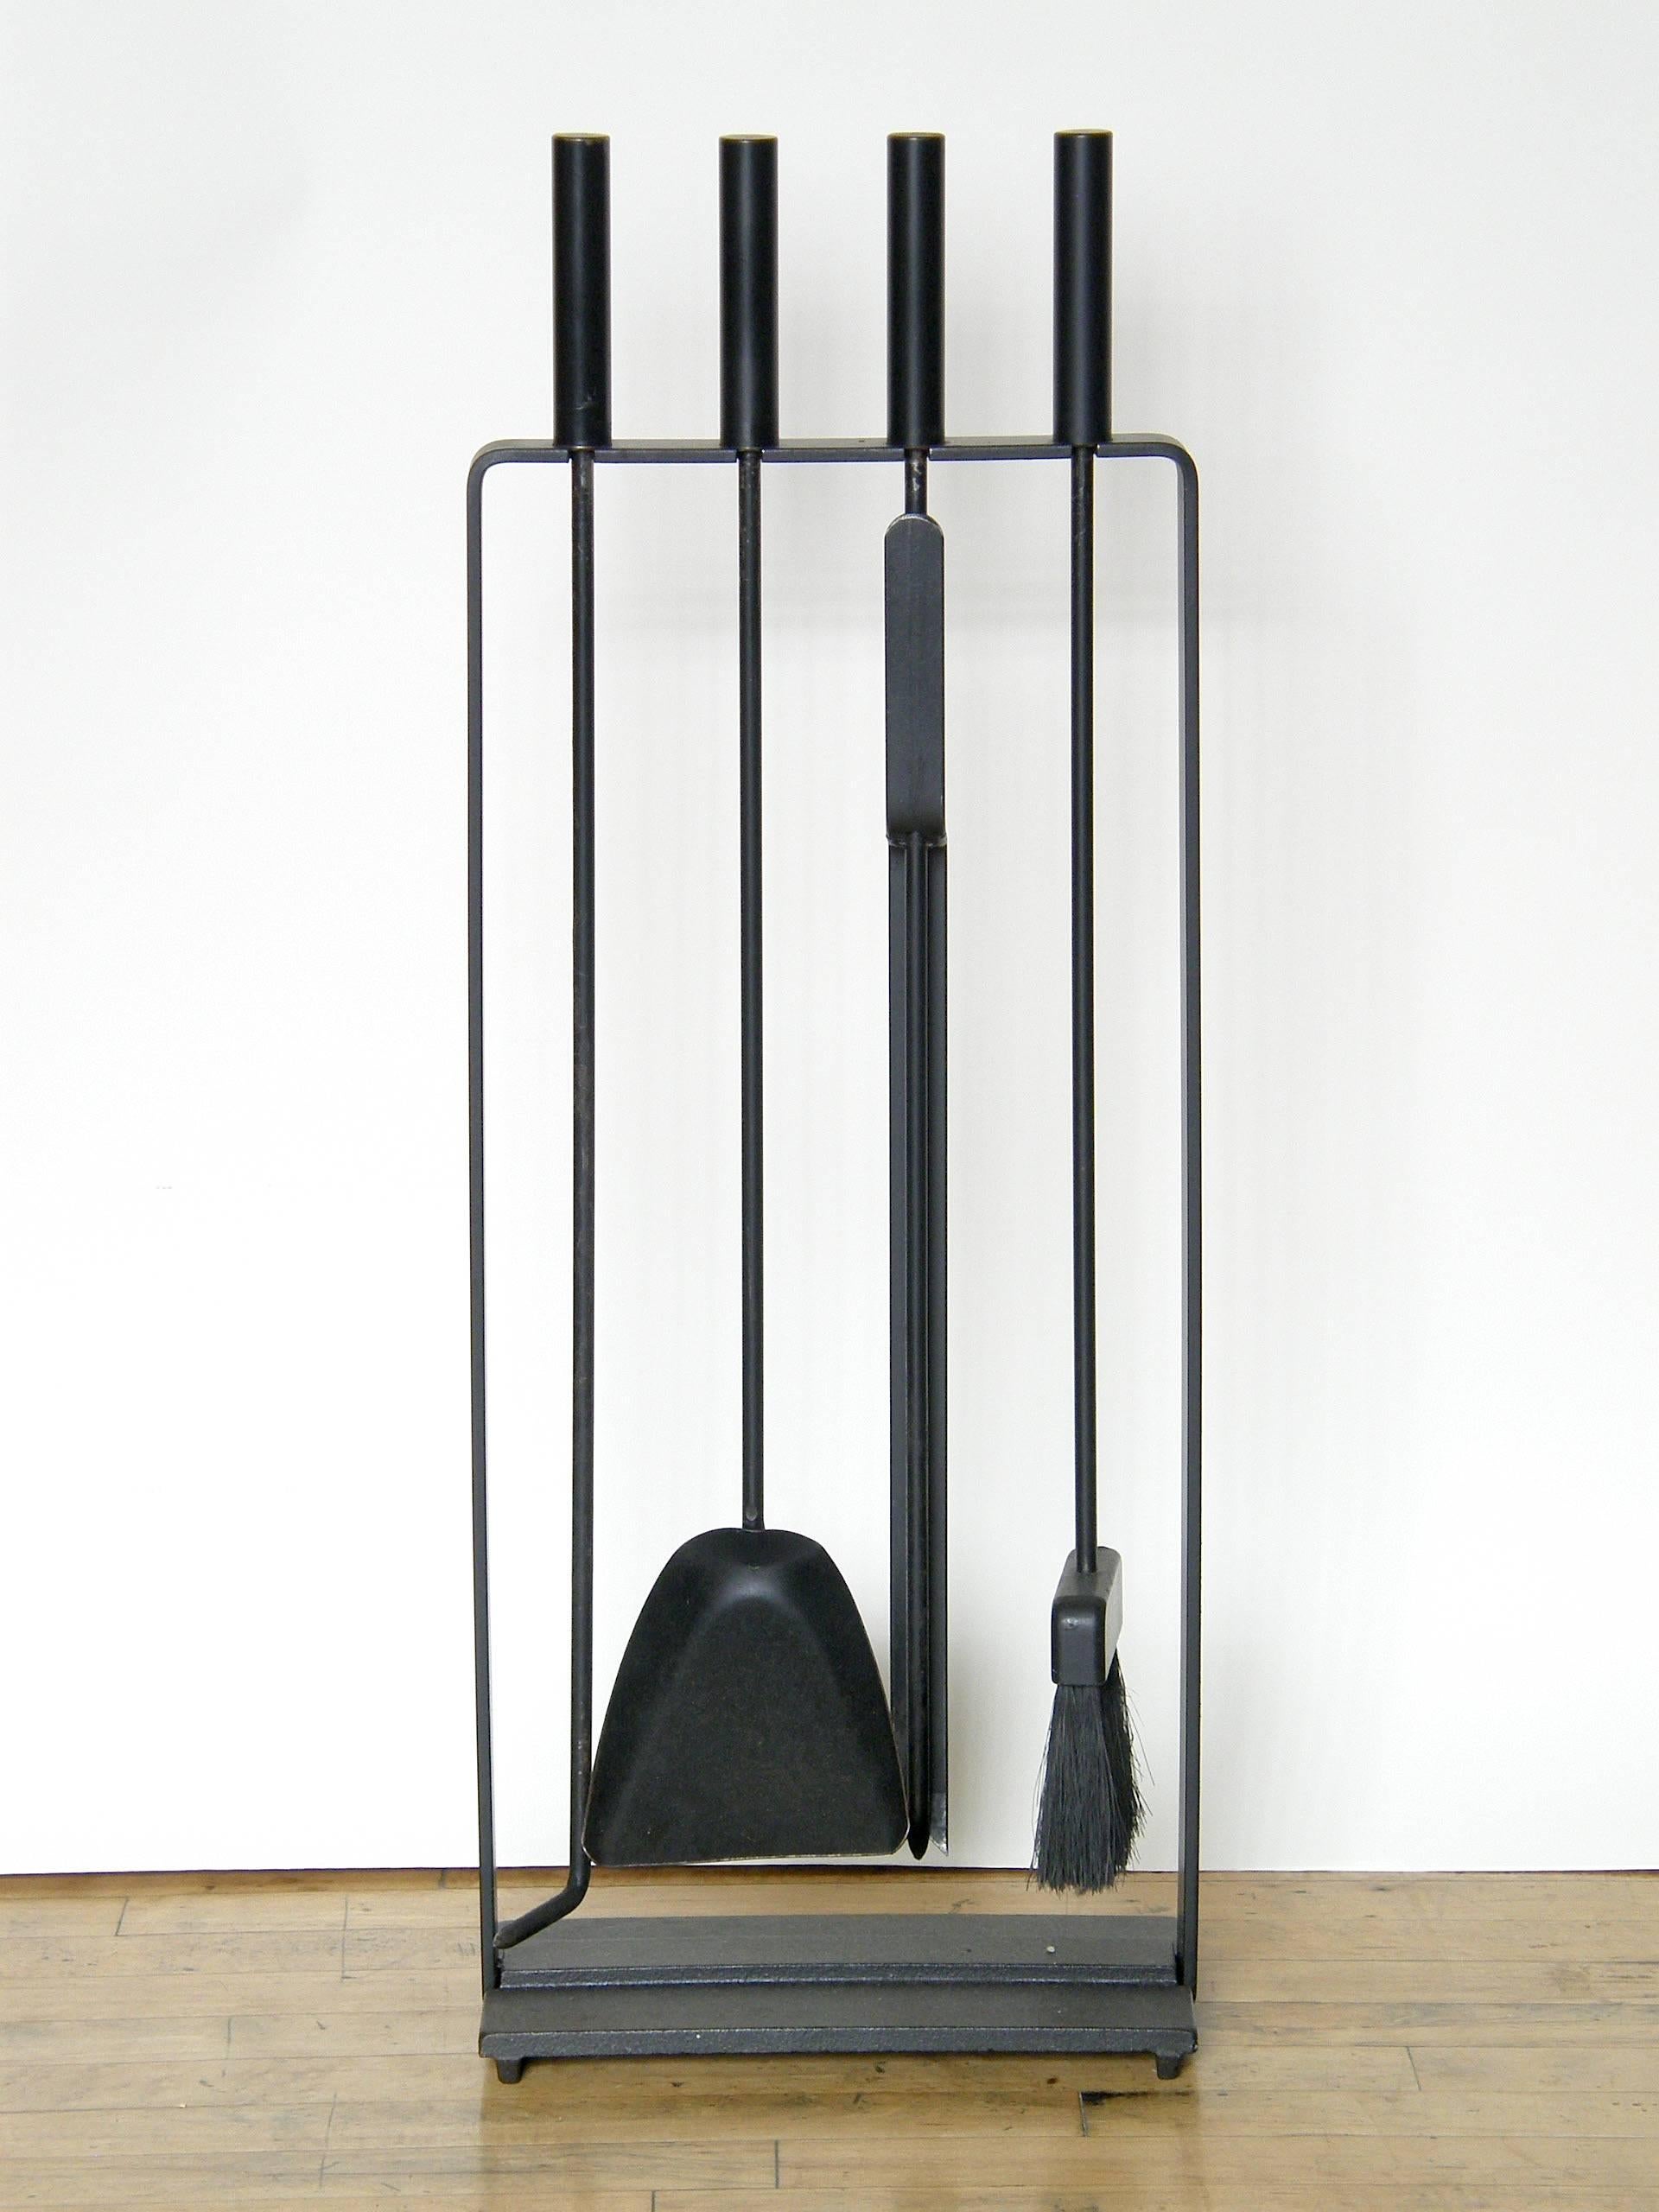 Modernist set of iron fire tools on stand by Pilgrim with poker, shovel, broom, and tongs style log grabber.

Please contact us if you have any questions.